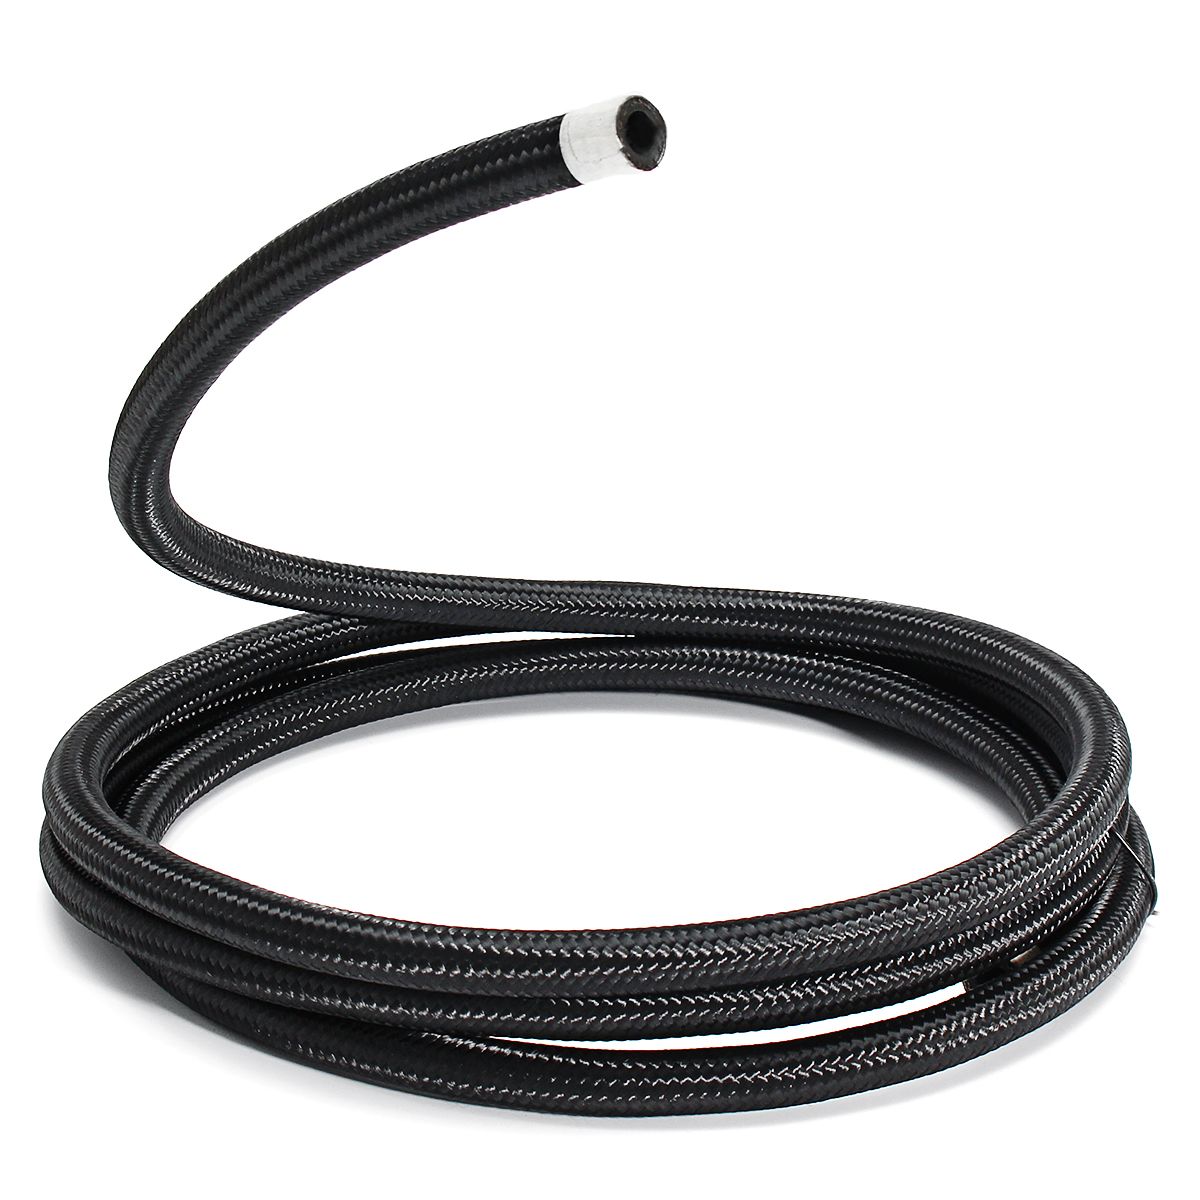 3m-Long-AN6-6AN-Nylon-Braided-Hose-Black-Stainless-Steel-Oil-Fuel-Line-Hose-1178337